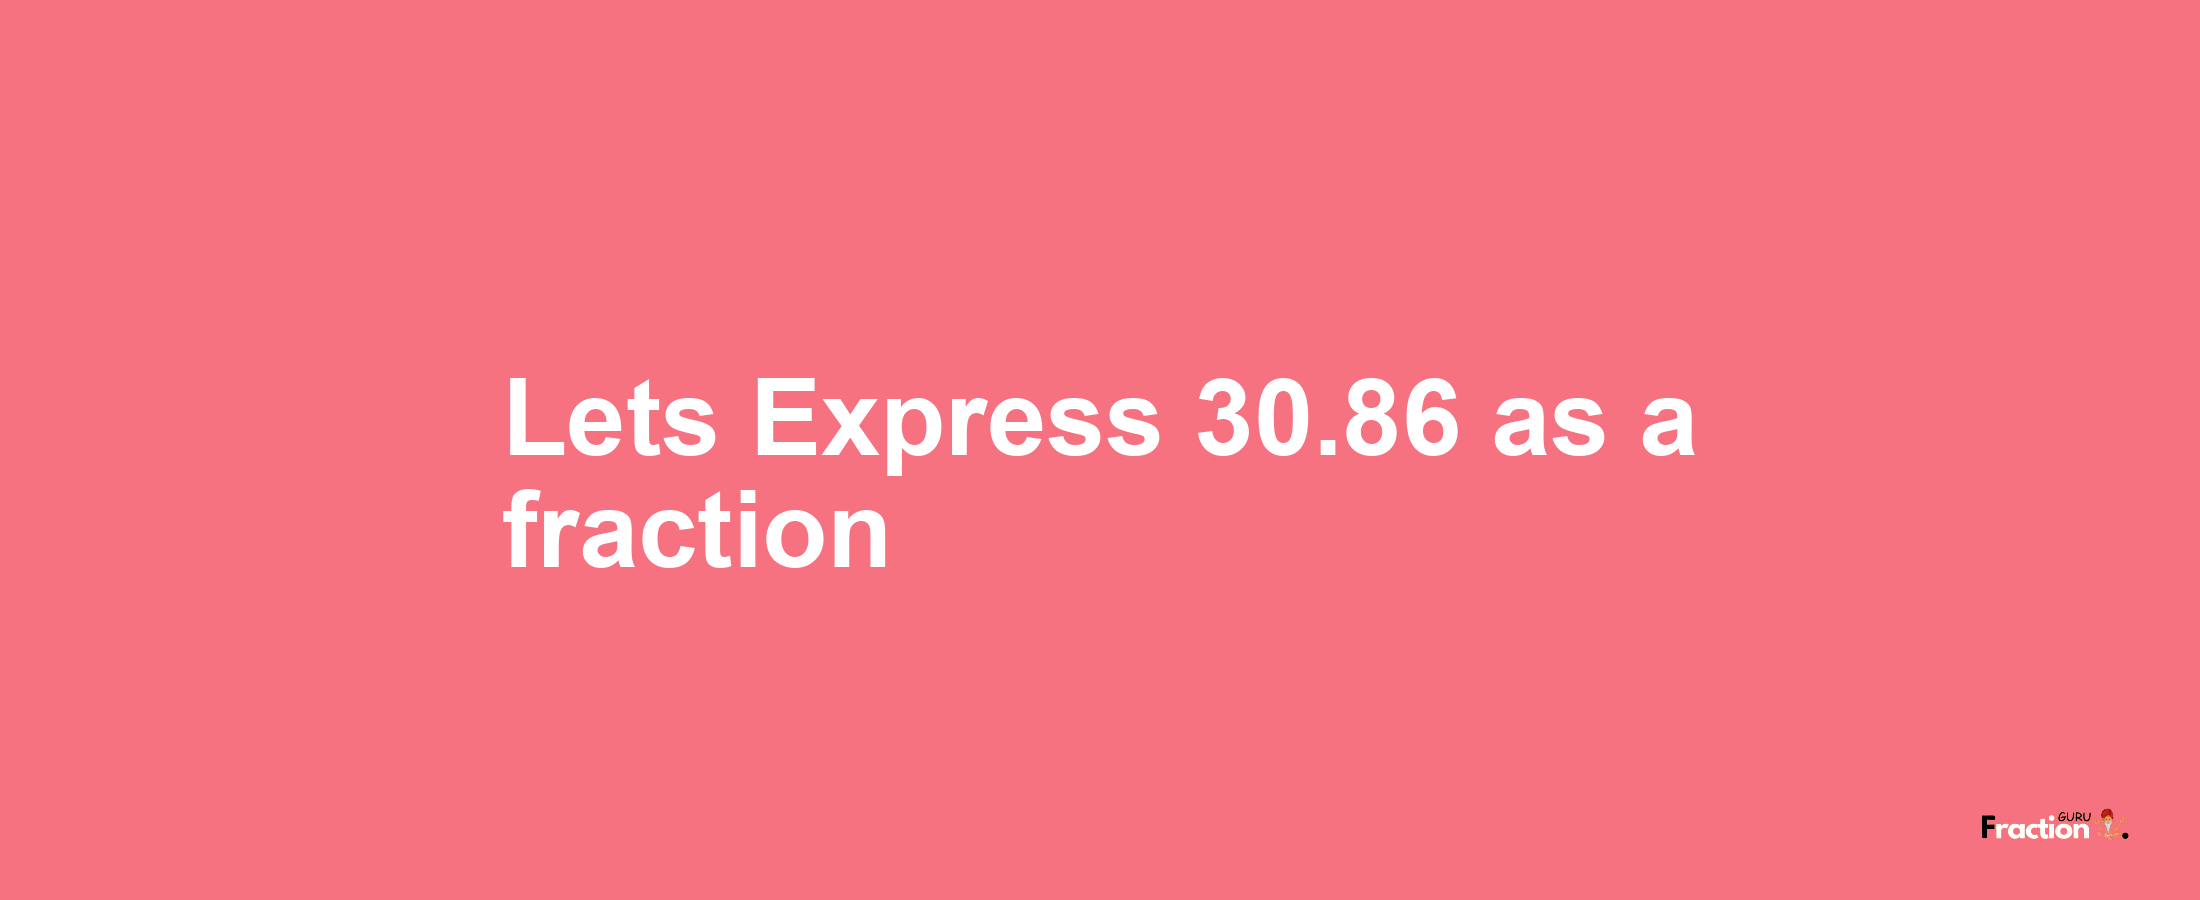 Lets Express 30.86 as afraction